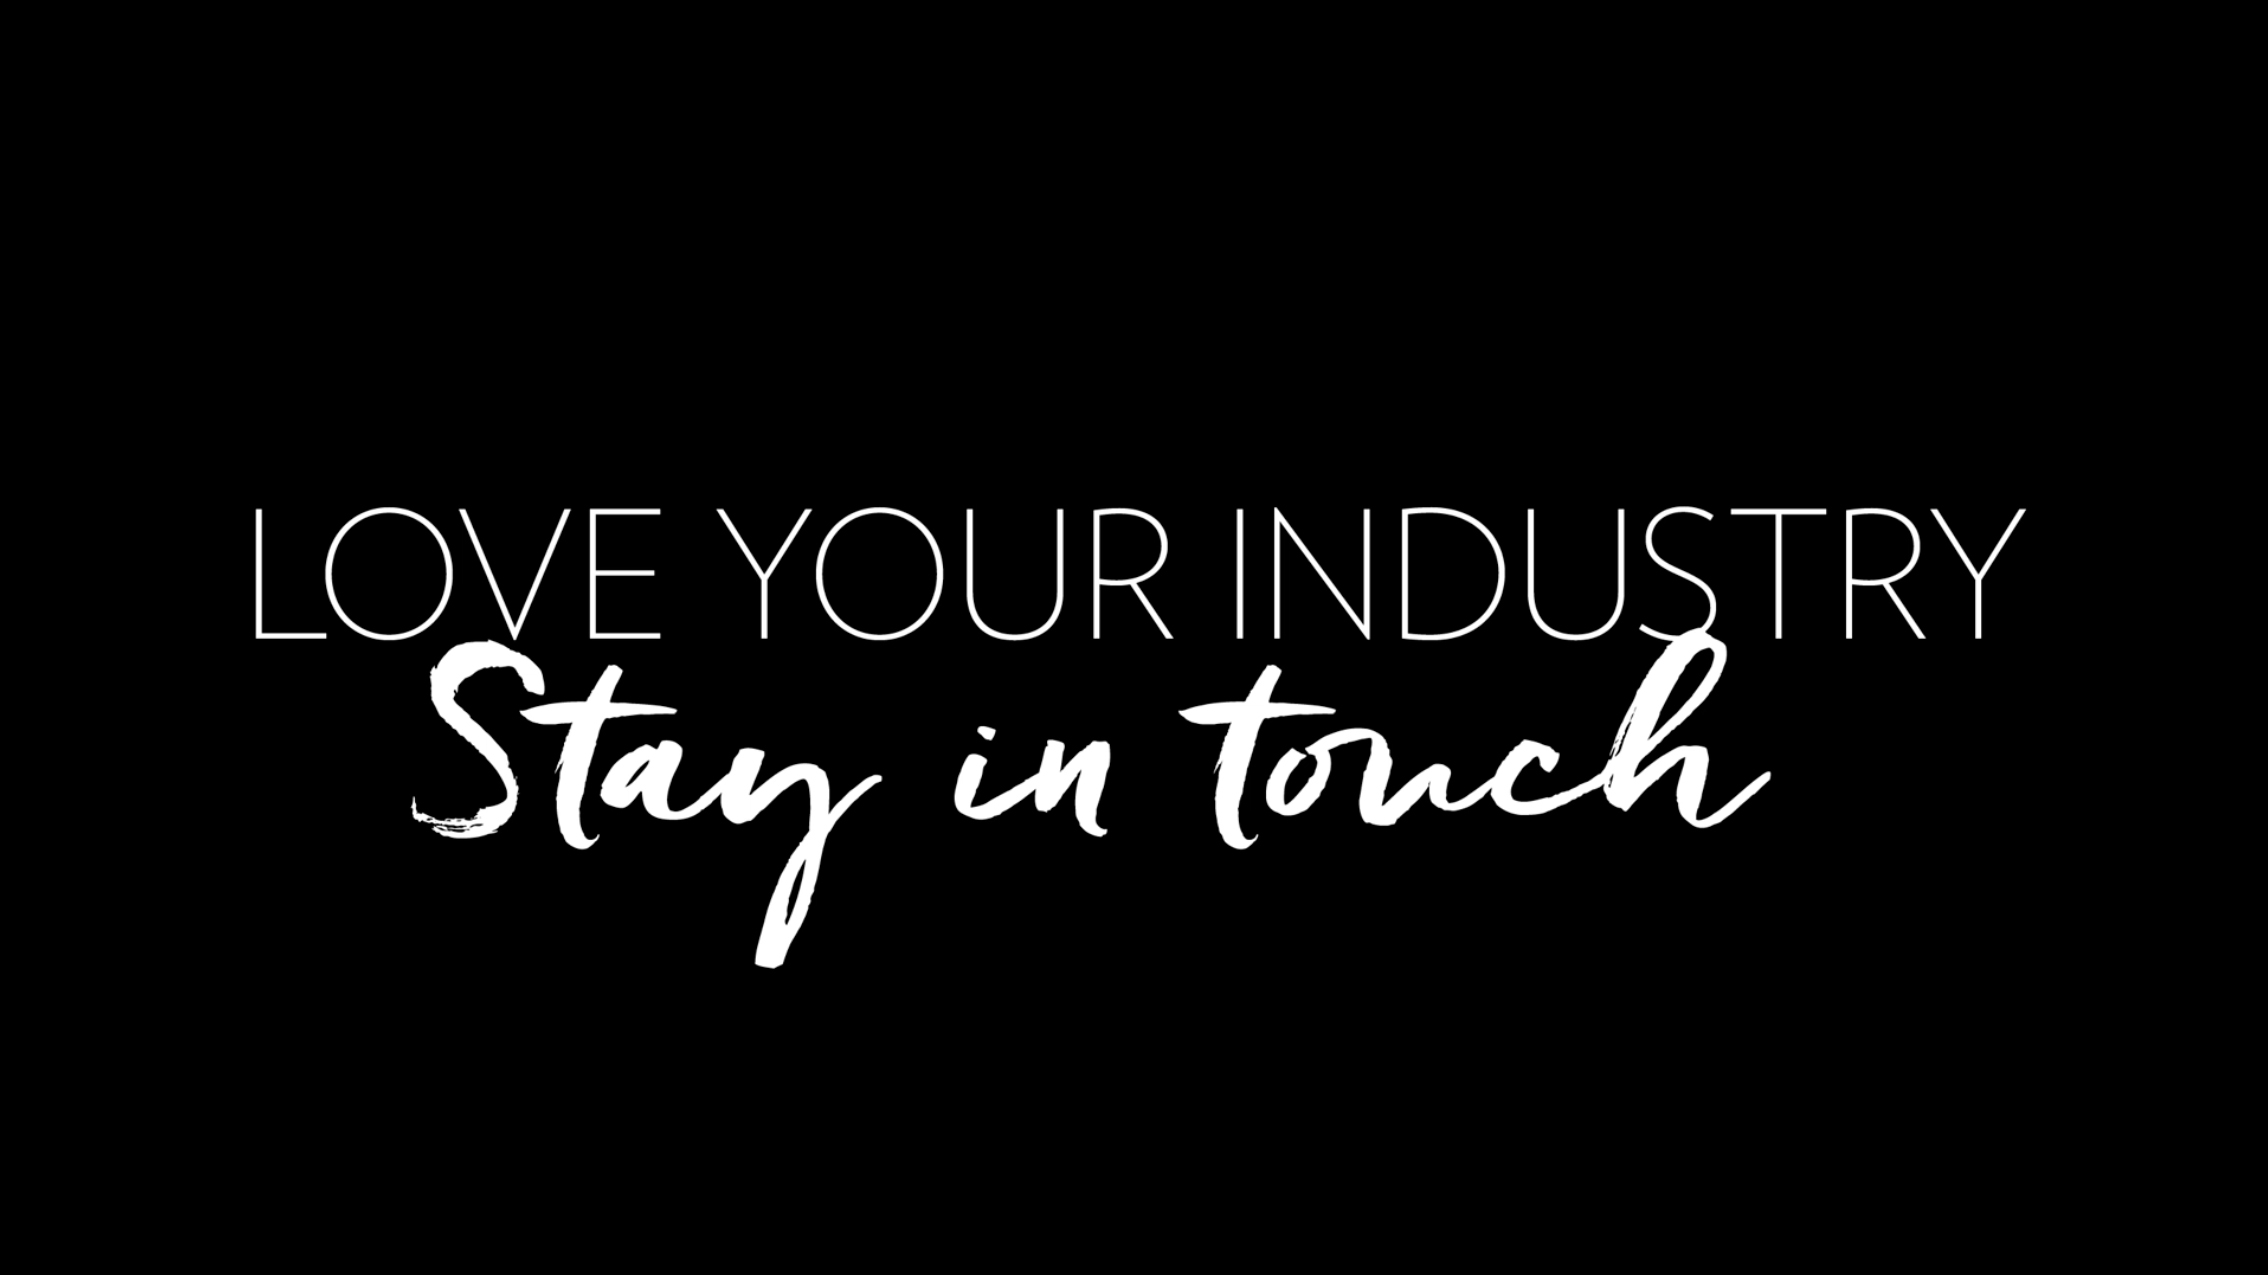 Professional Beauty shares the love industry wide…